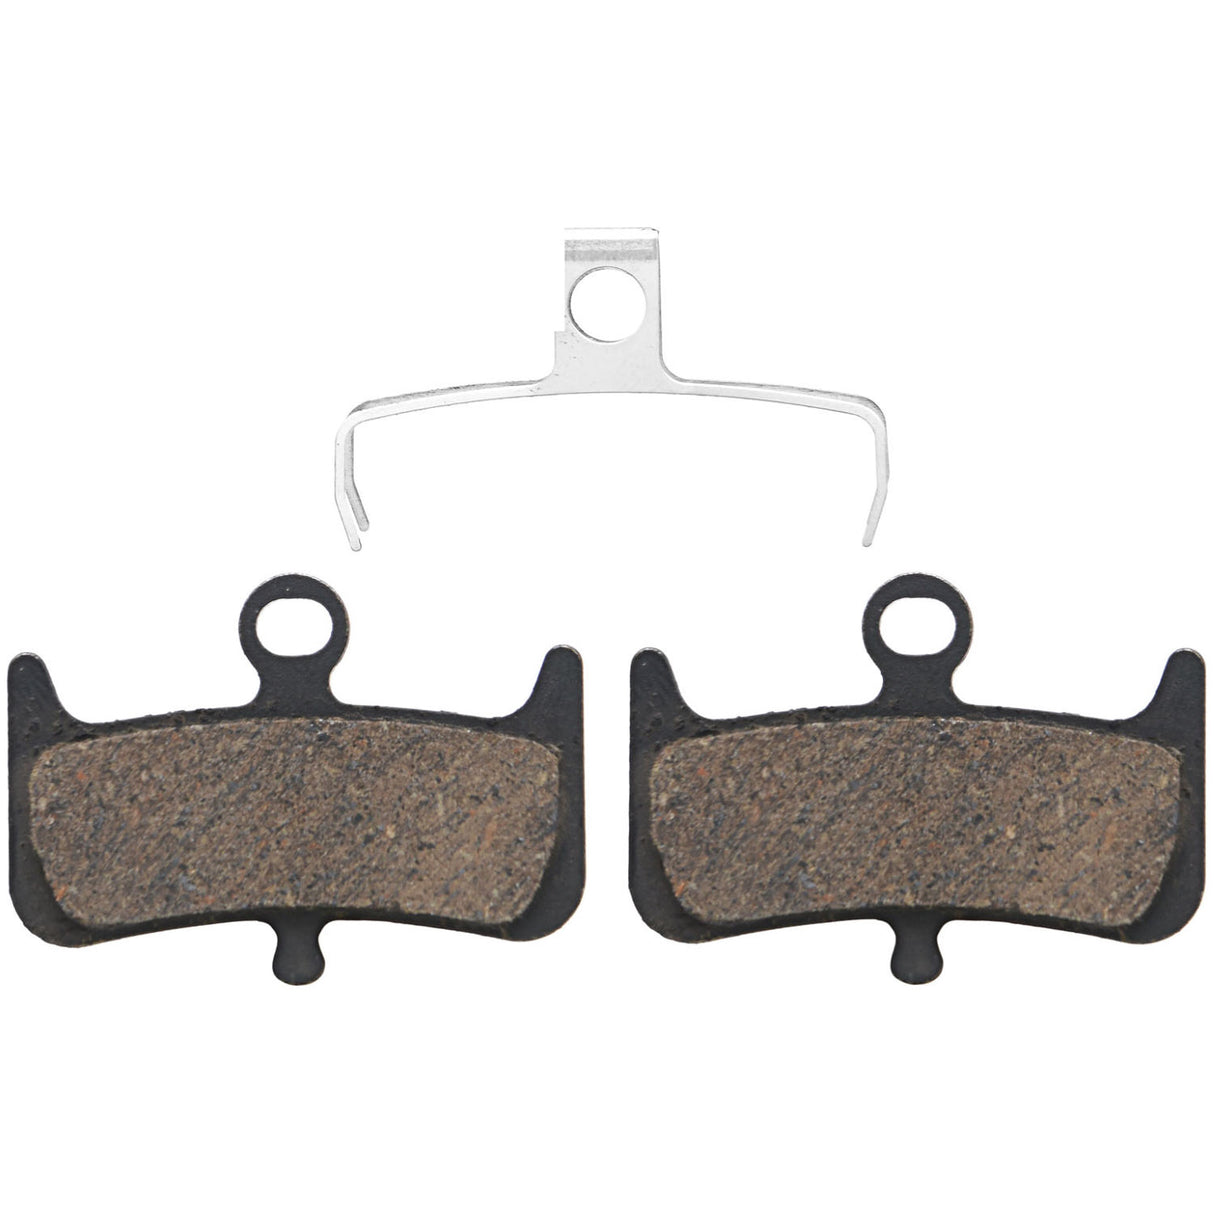 Nukeproof Hayes Dominion A4 Disc Brake Pads